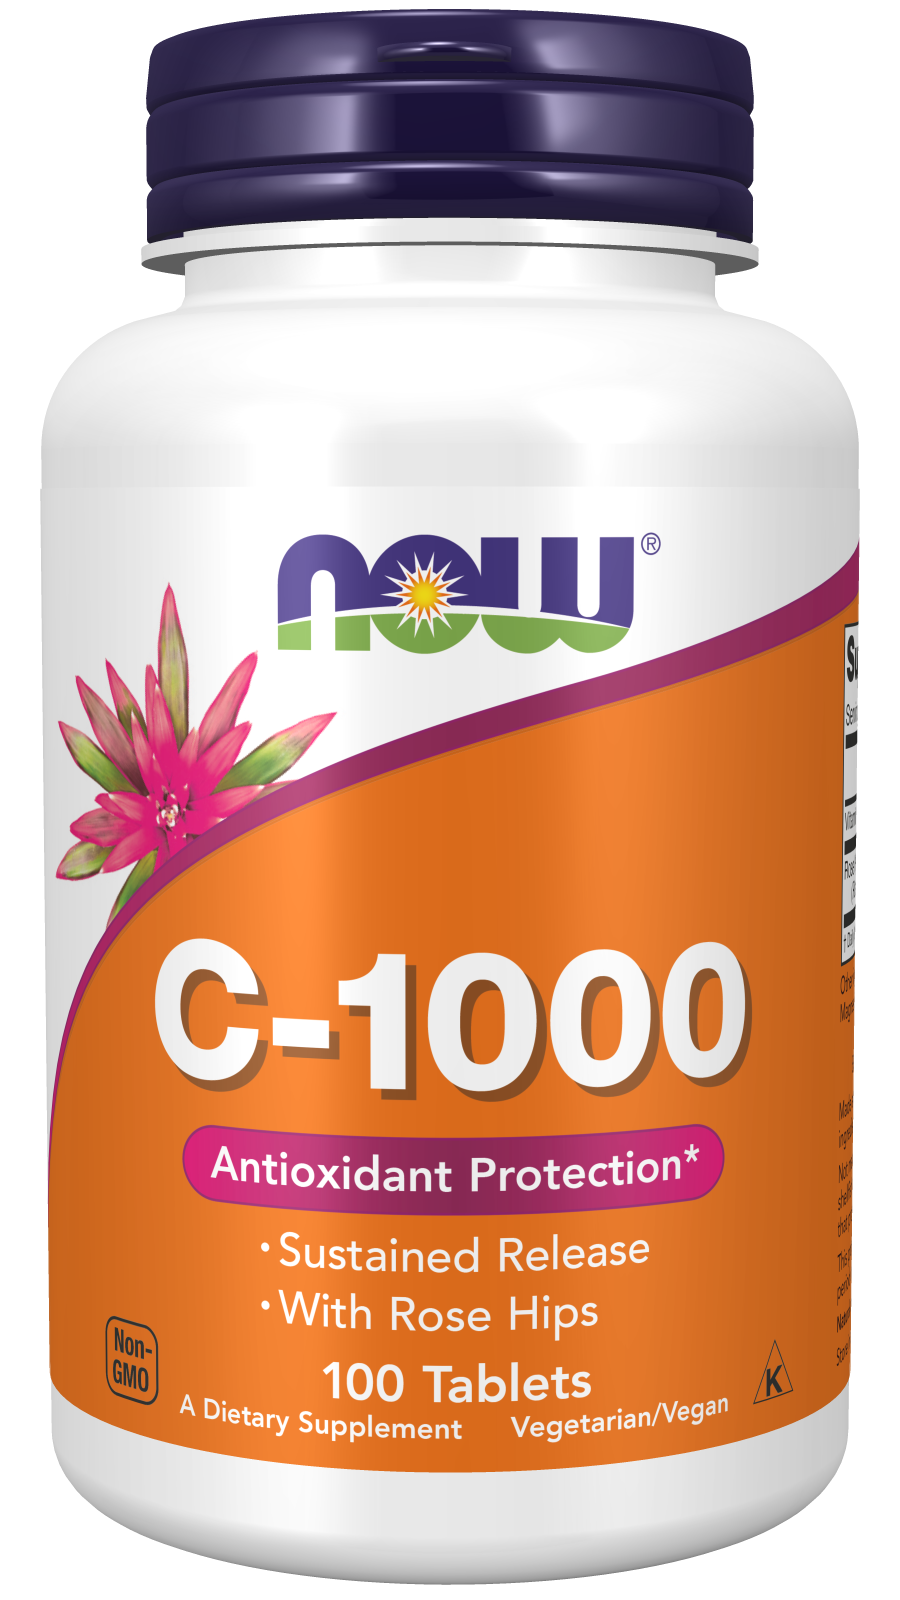 Vitamin C-1000 Sustained Release - 100 Tablets Bottle Front